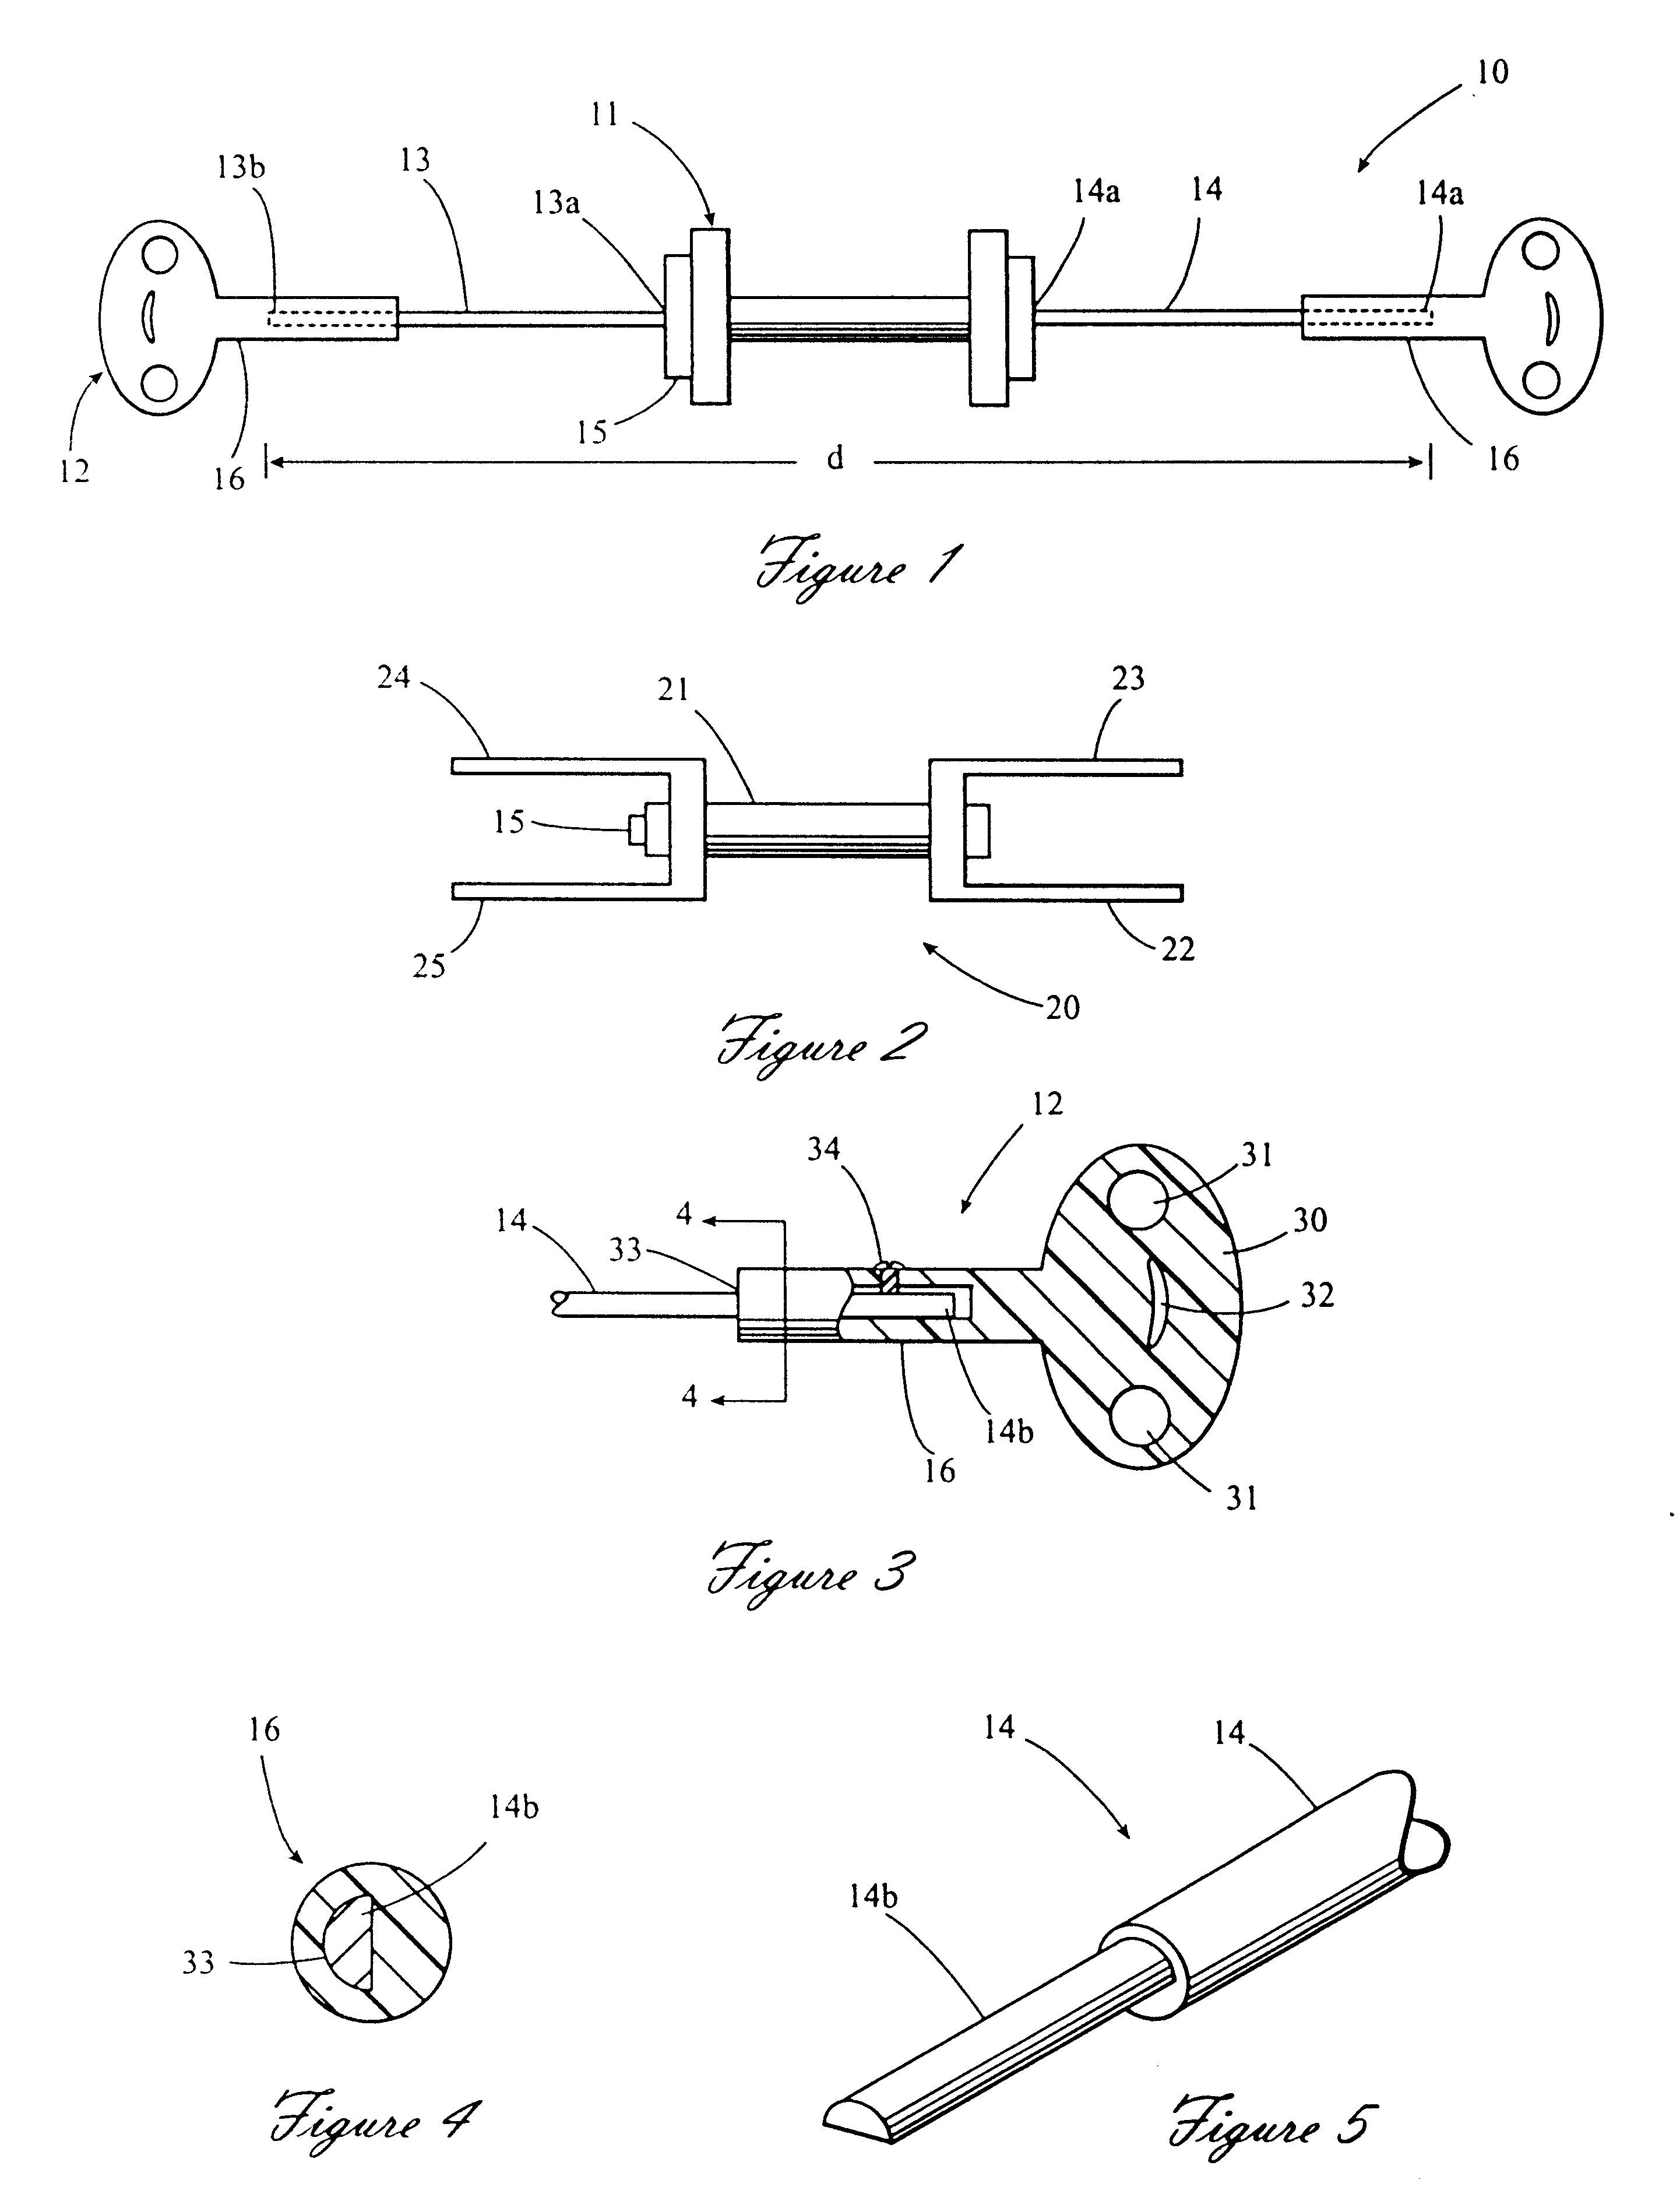 Distraction osteogenesis device and method